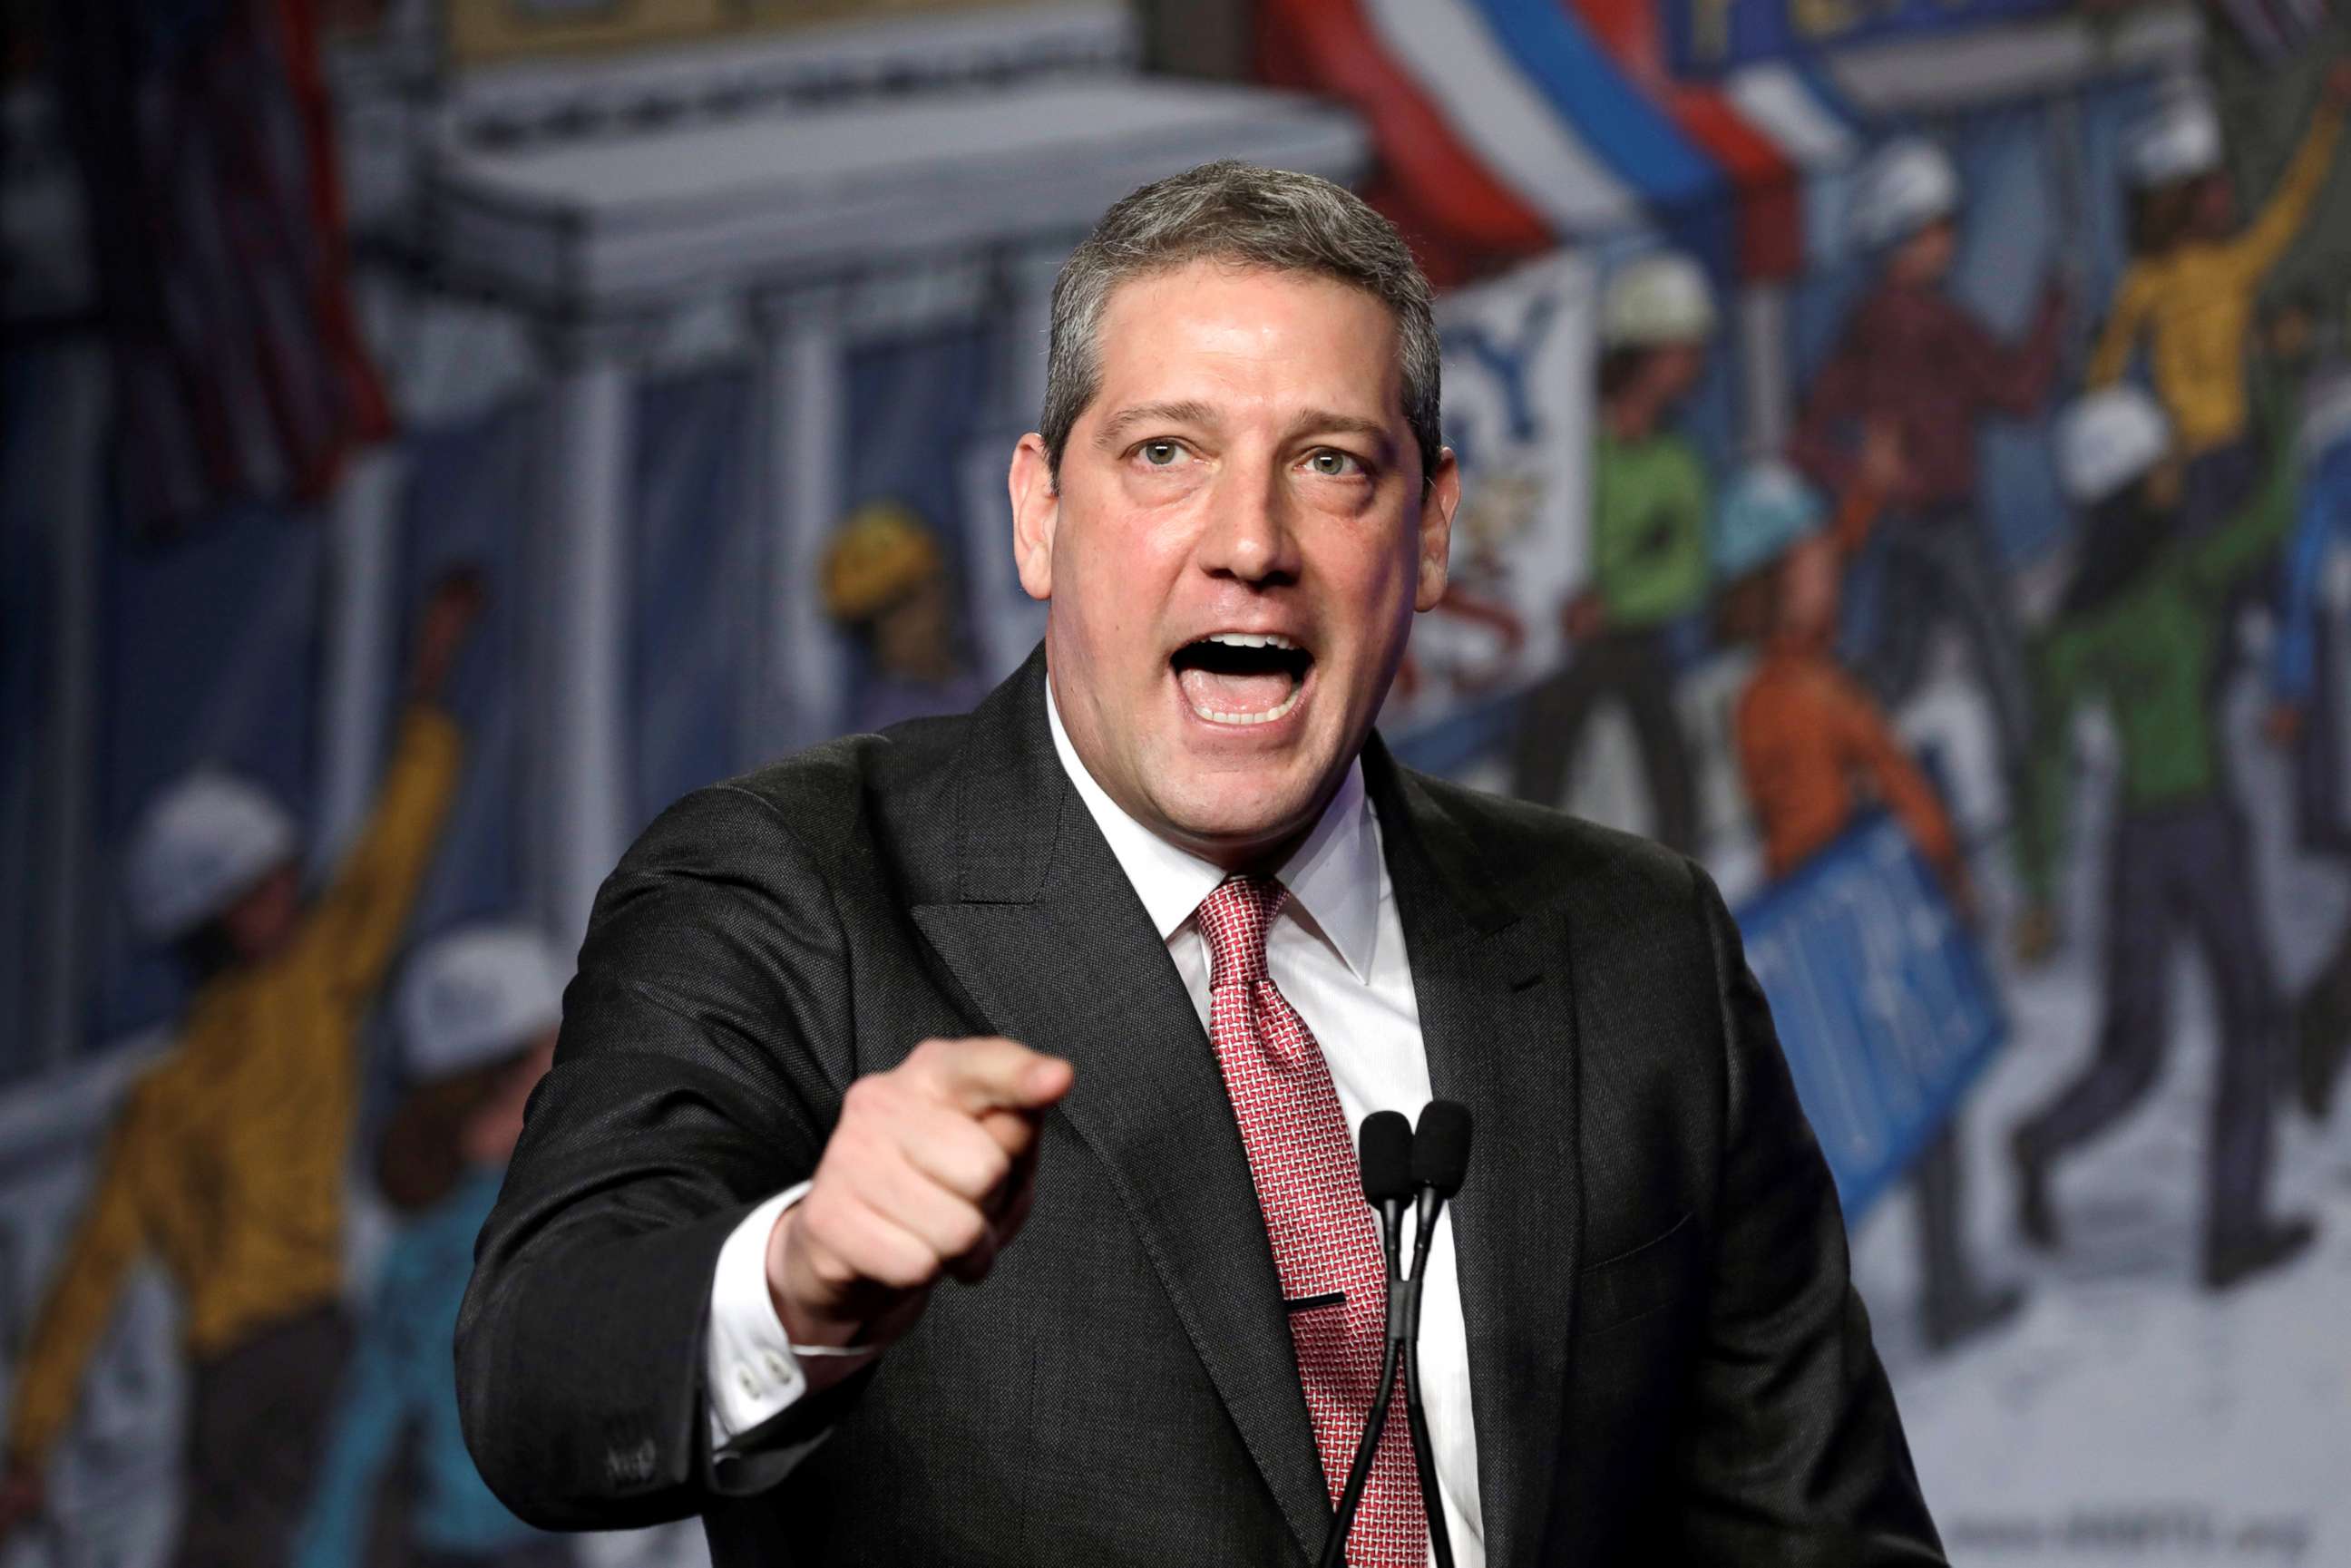 PHOTO: Democratic presidential candidate Rep. Tim Ryan speaks at the North America's Building Trades Unions (NABTU) 2019 legislative conference in Washington, April 10, 2019.